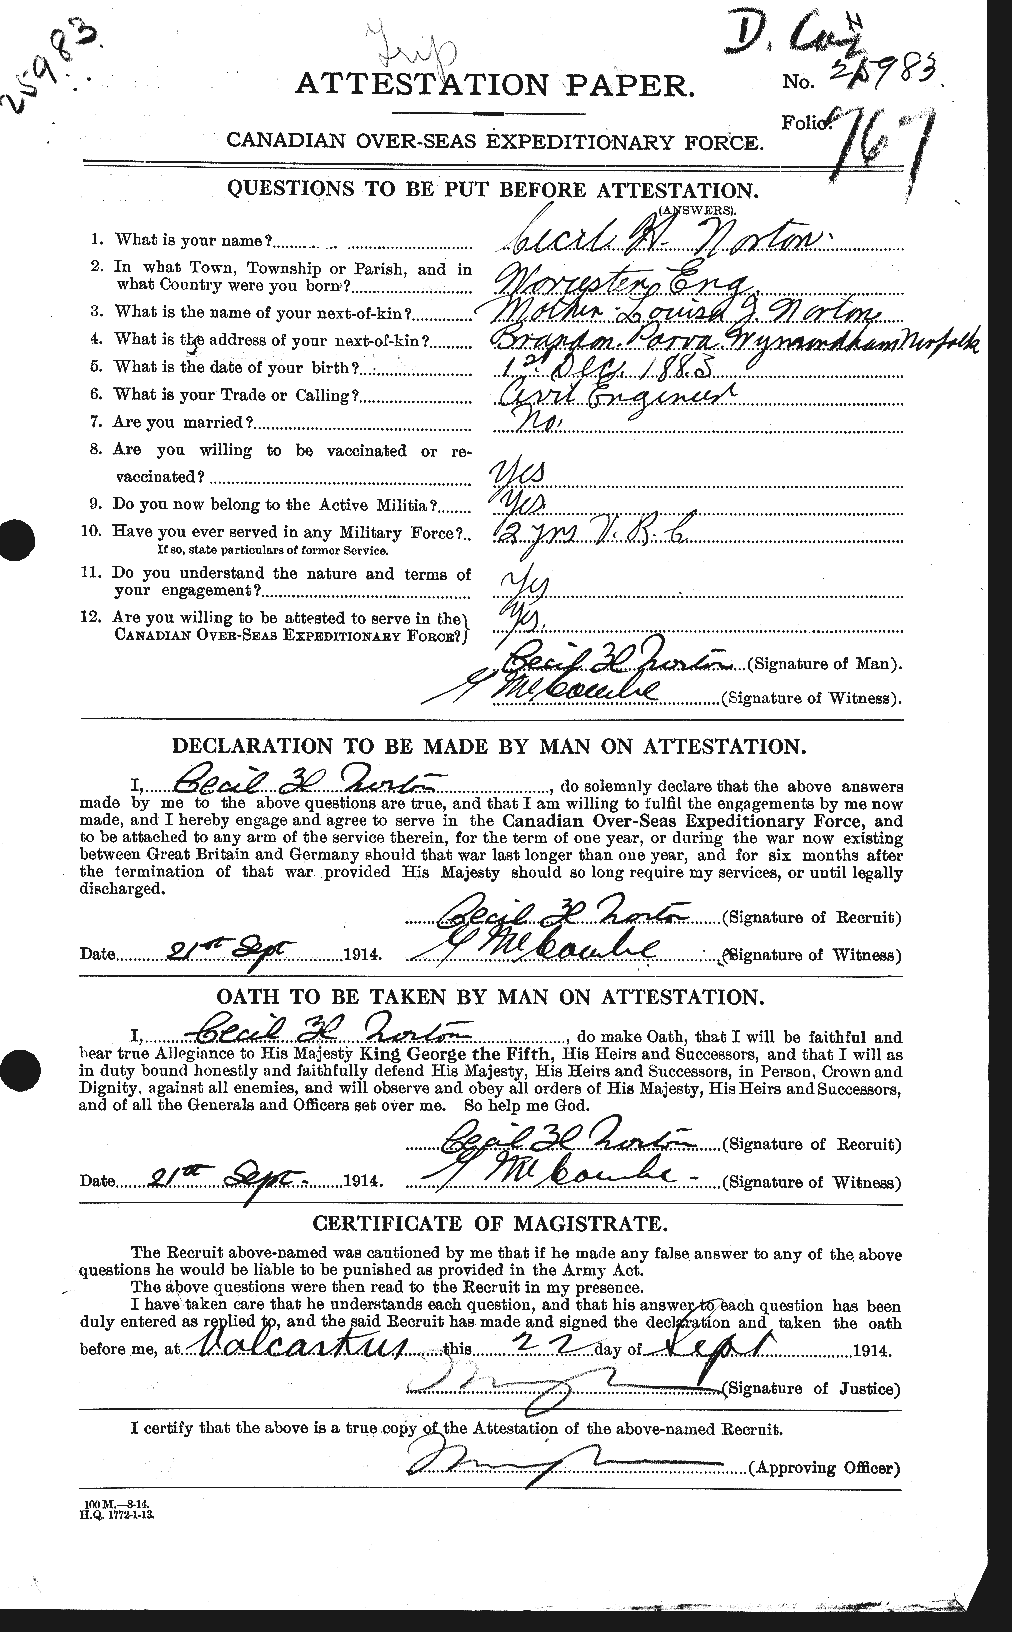 Personnel Records of the First World War - CEF 551769a